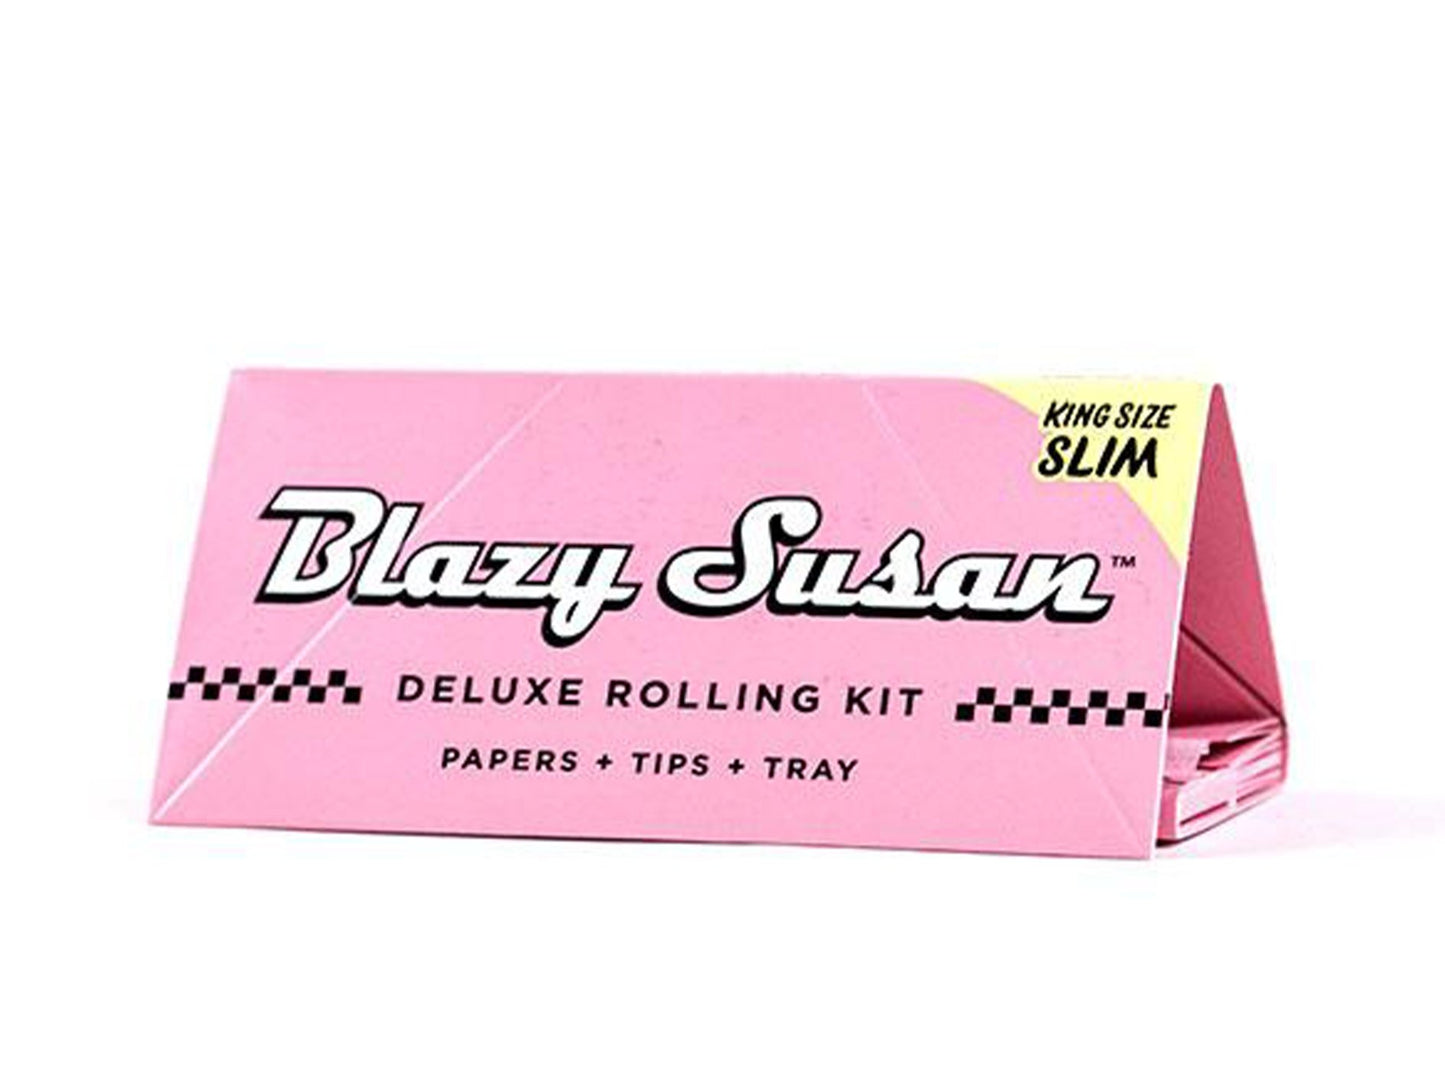 BLAZY SUSAN King Size Papers With Tips And Tray Deluxe - 20 Booklets Per Box - VIR Wholesale